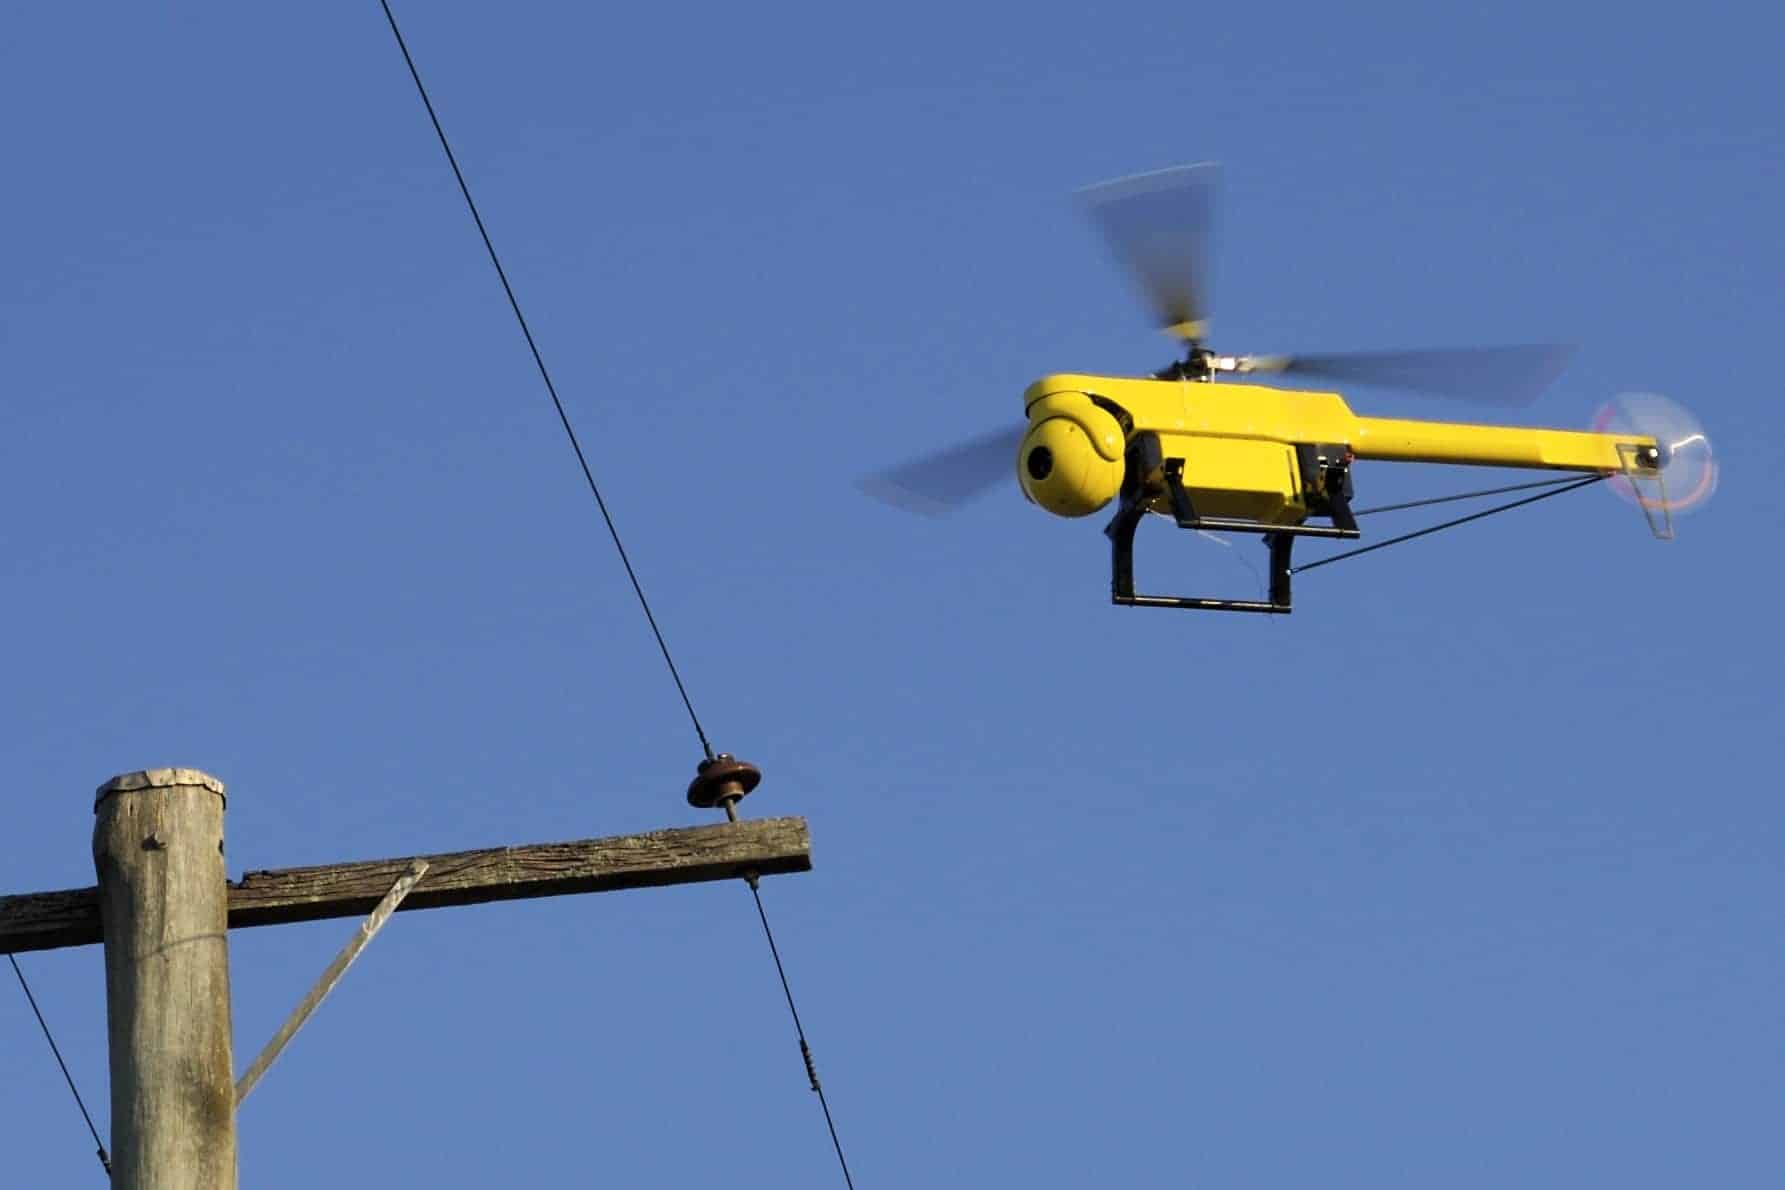 "CSIRO ScienceImage 10876 Camclone T21 Unmanned Autonomous Vehicle UAV fitted with CSIRO guidance system" by CSIRO. Licensed under CC BY 3.0 via Wikimedia Commons